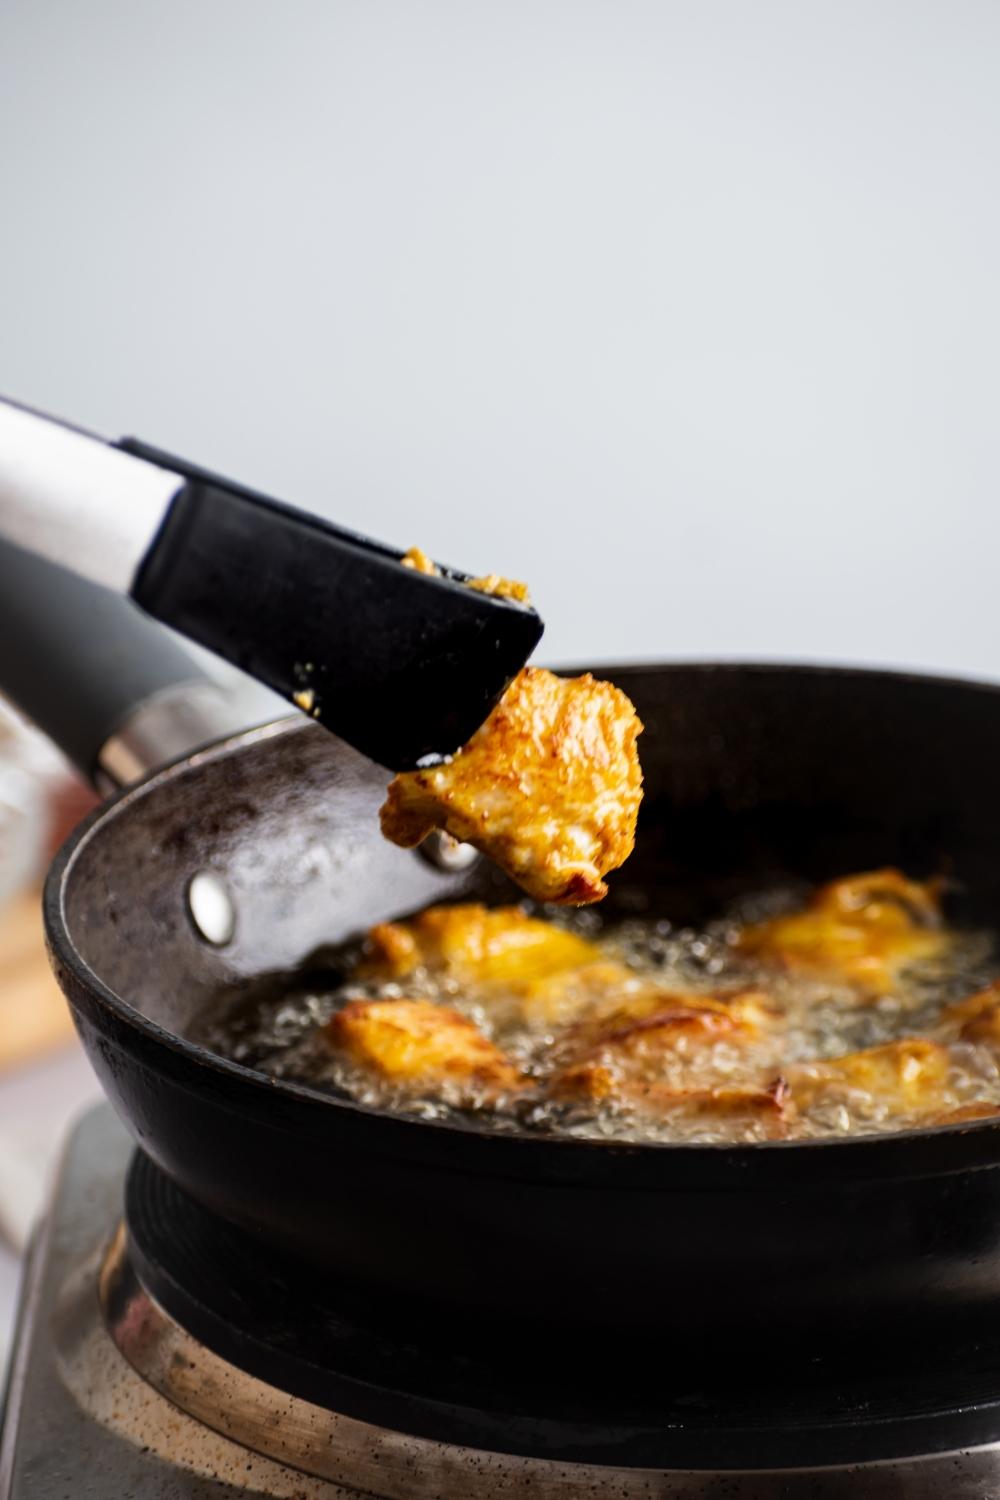 Tongs with a piece of piece of chicken between them over a pan that has chicken frying in it.